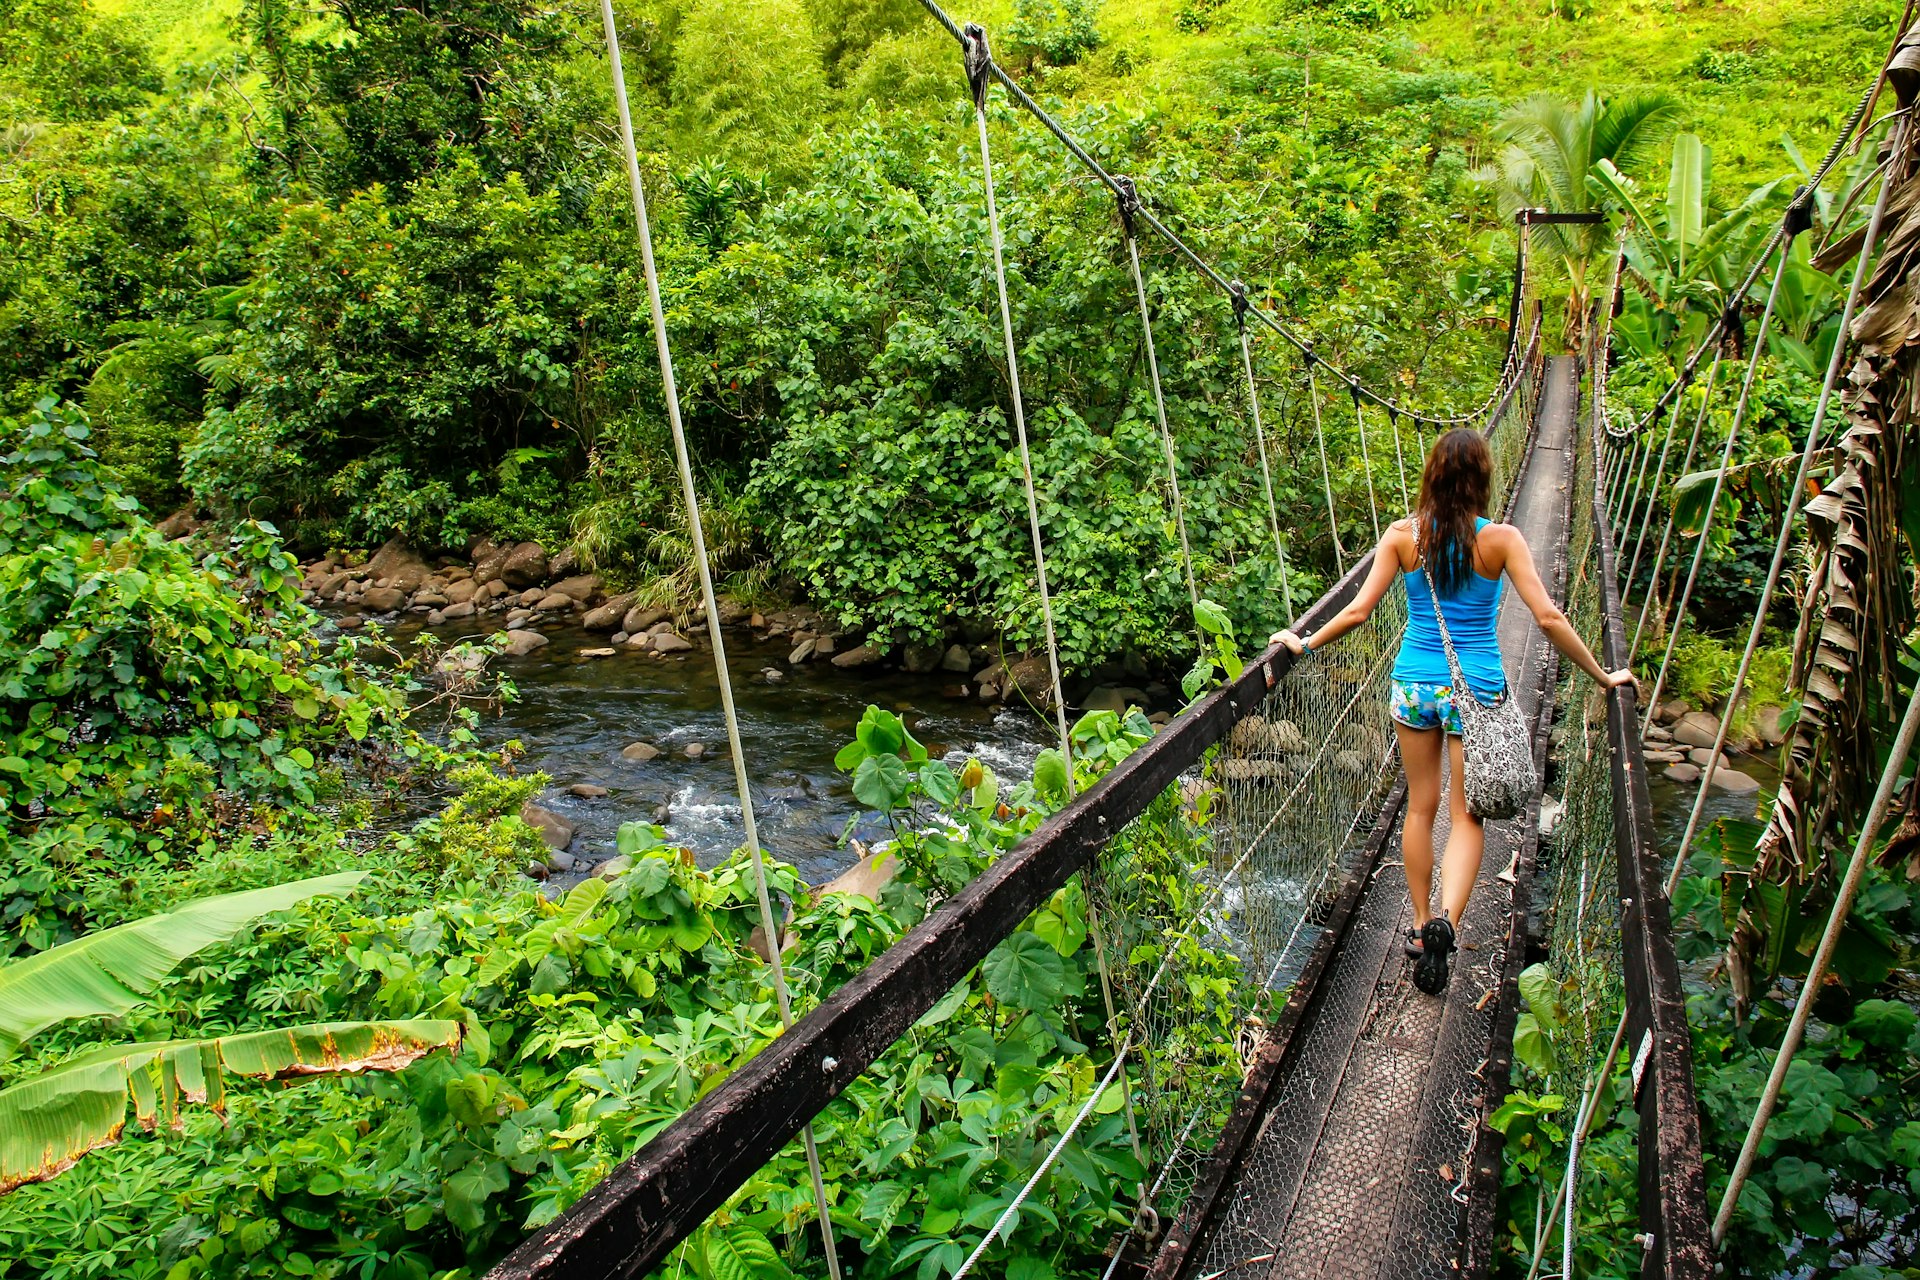 A woman walks along a suspension bridge surrounded by lush green forests in Fiji